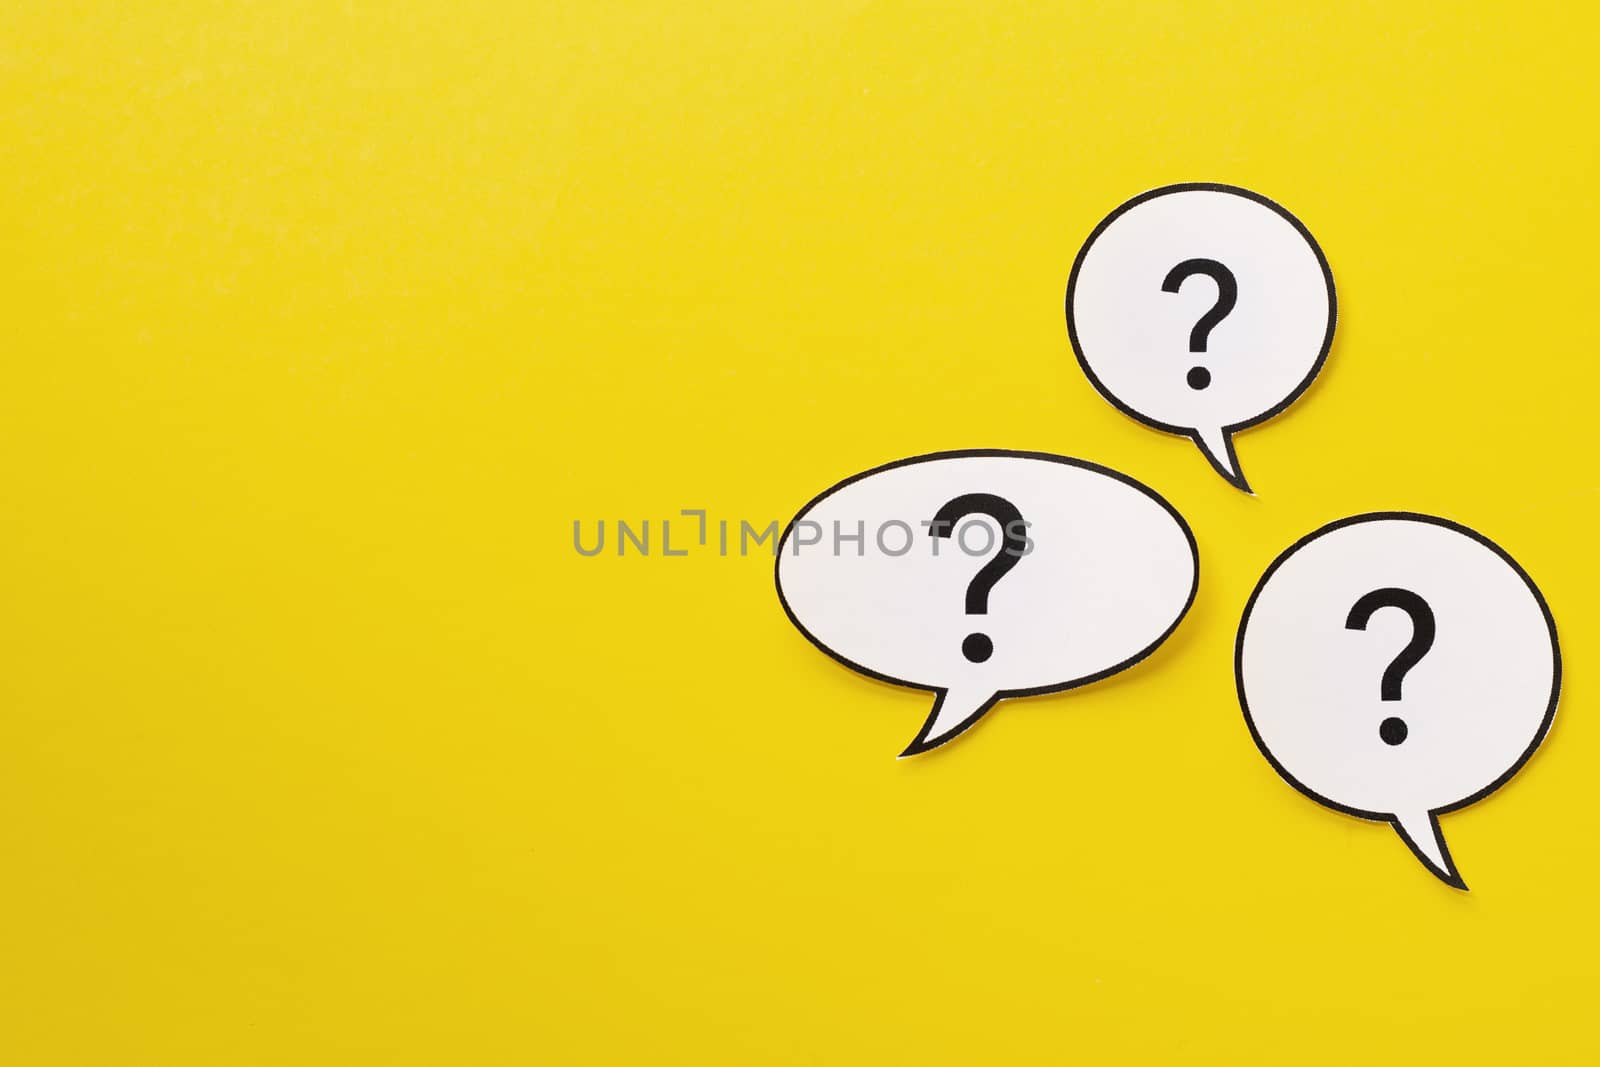 Three different shaped speech bubbles over a bright yellow background by sergii_gnatiuk